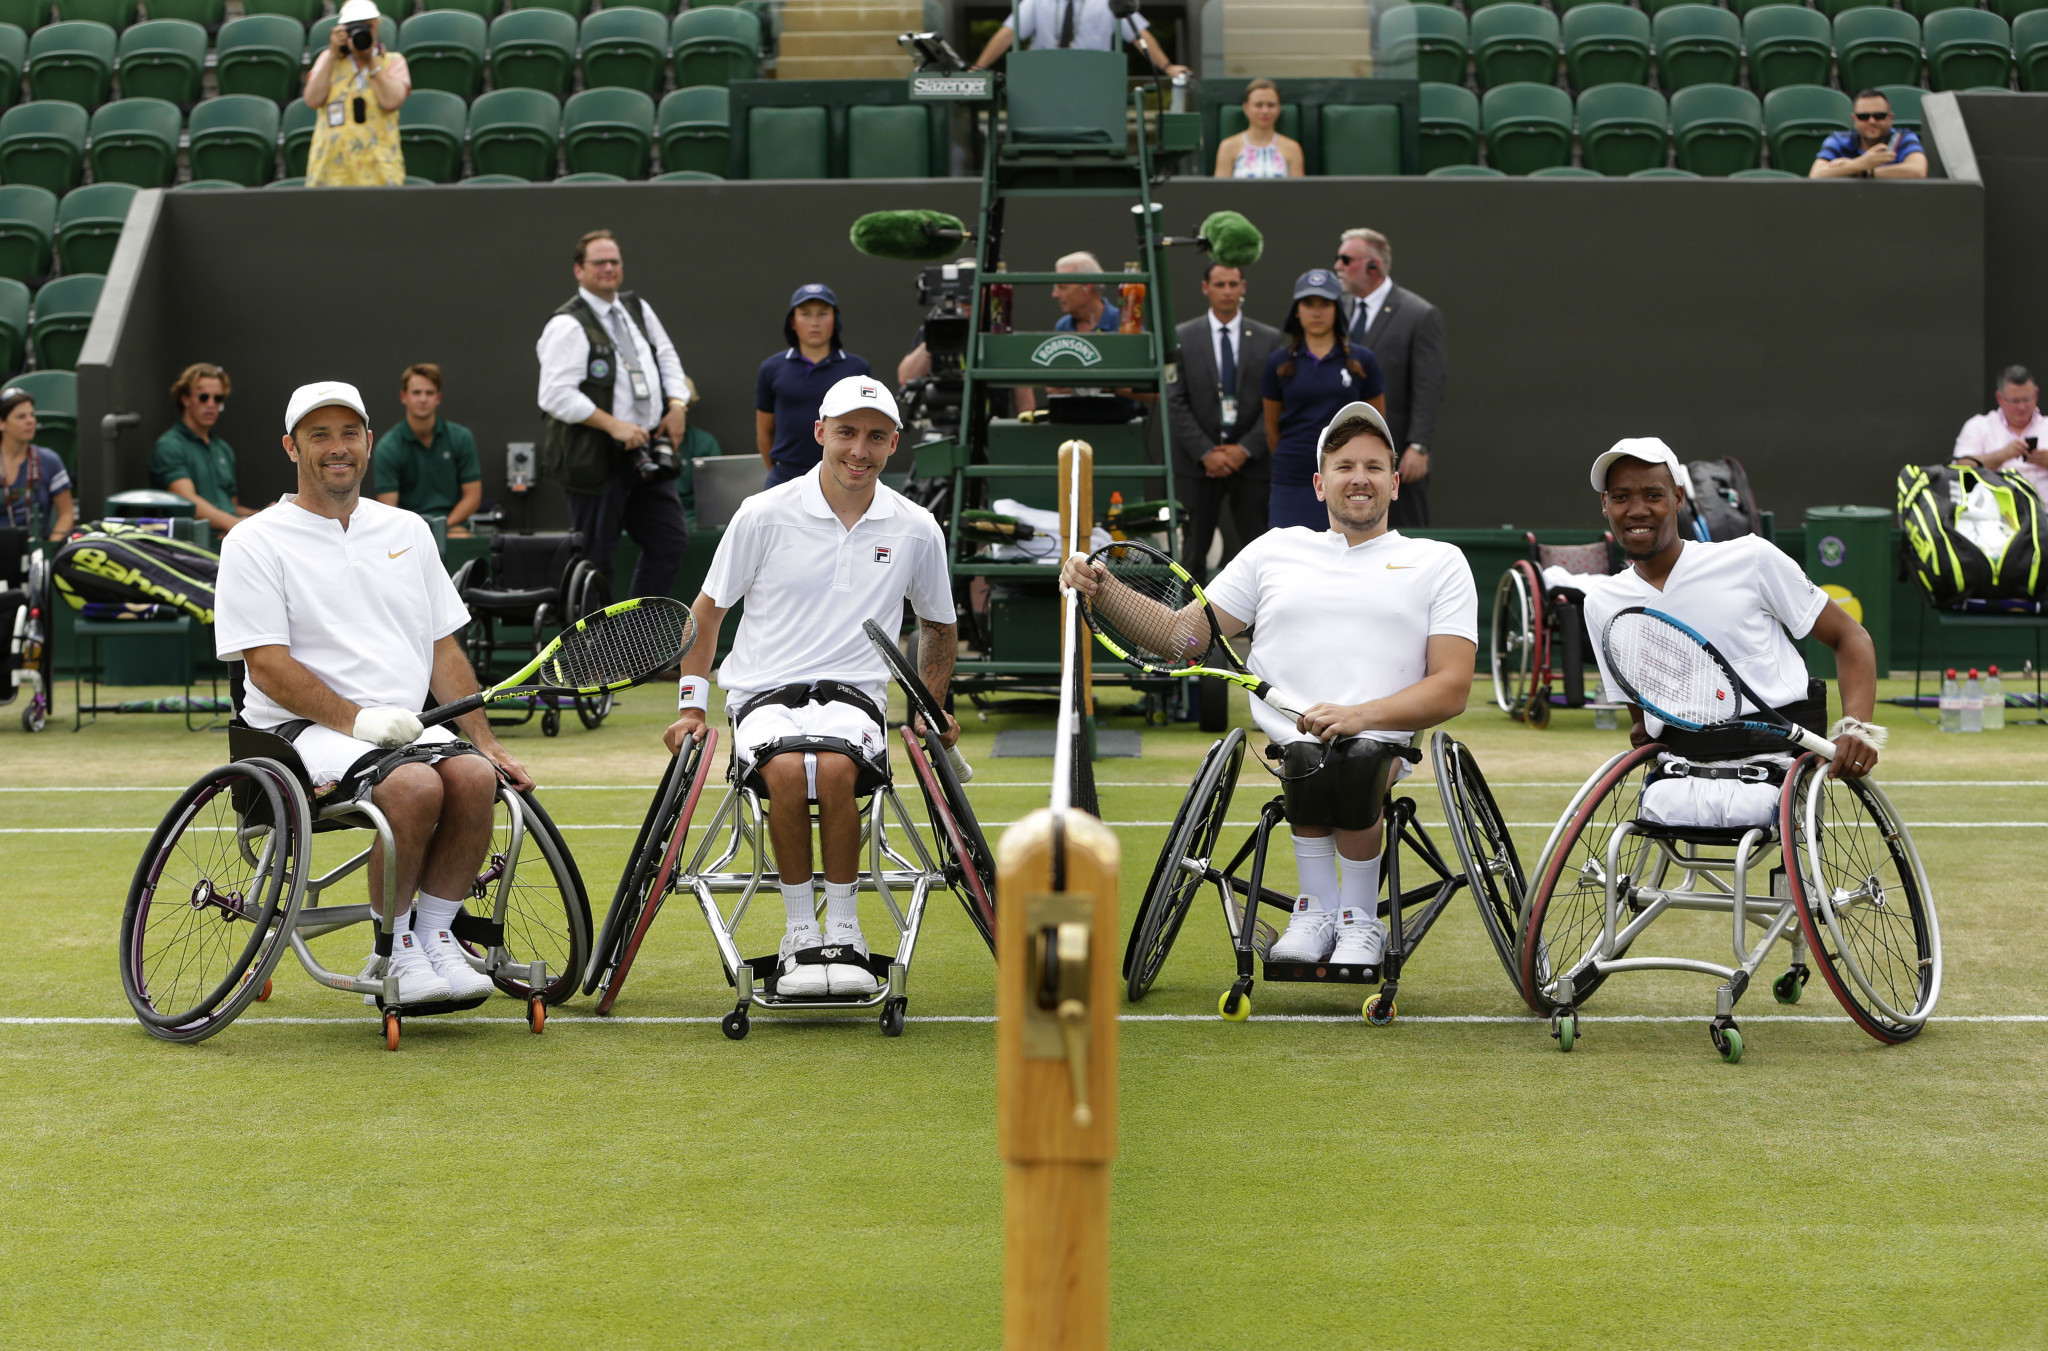 A quad doubles exhibition match took place at Wimbledon in 2018 ©Getty Images 